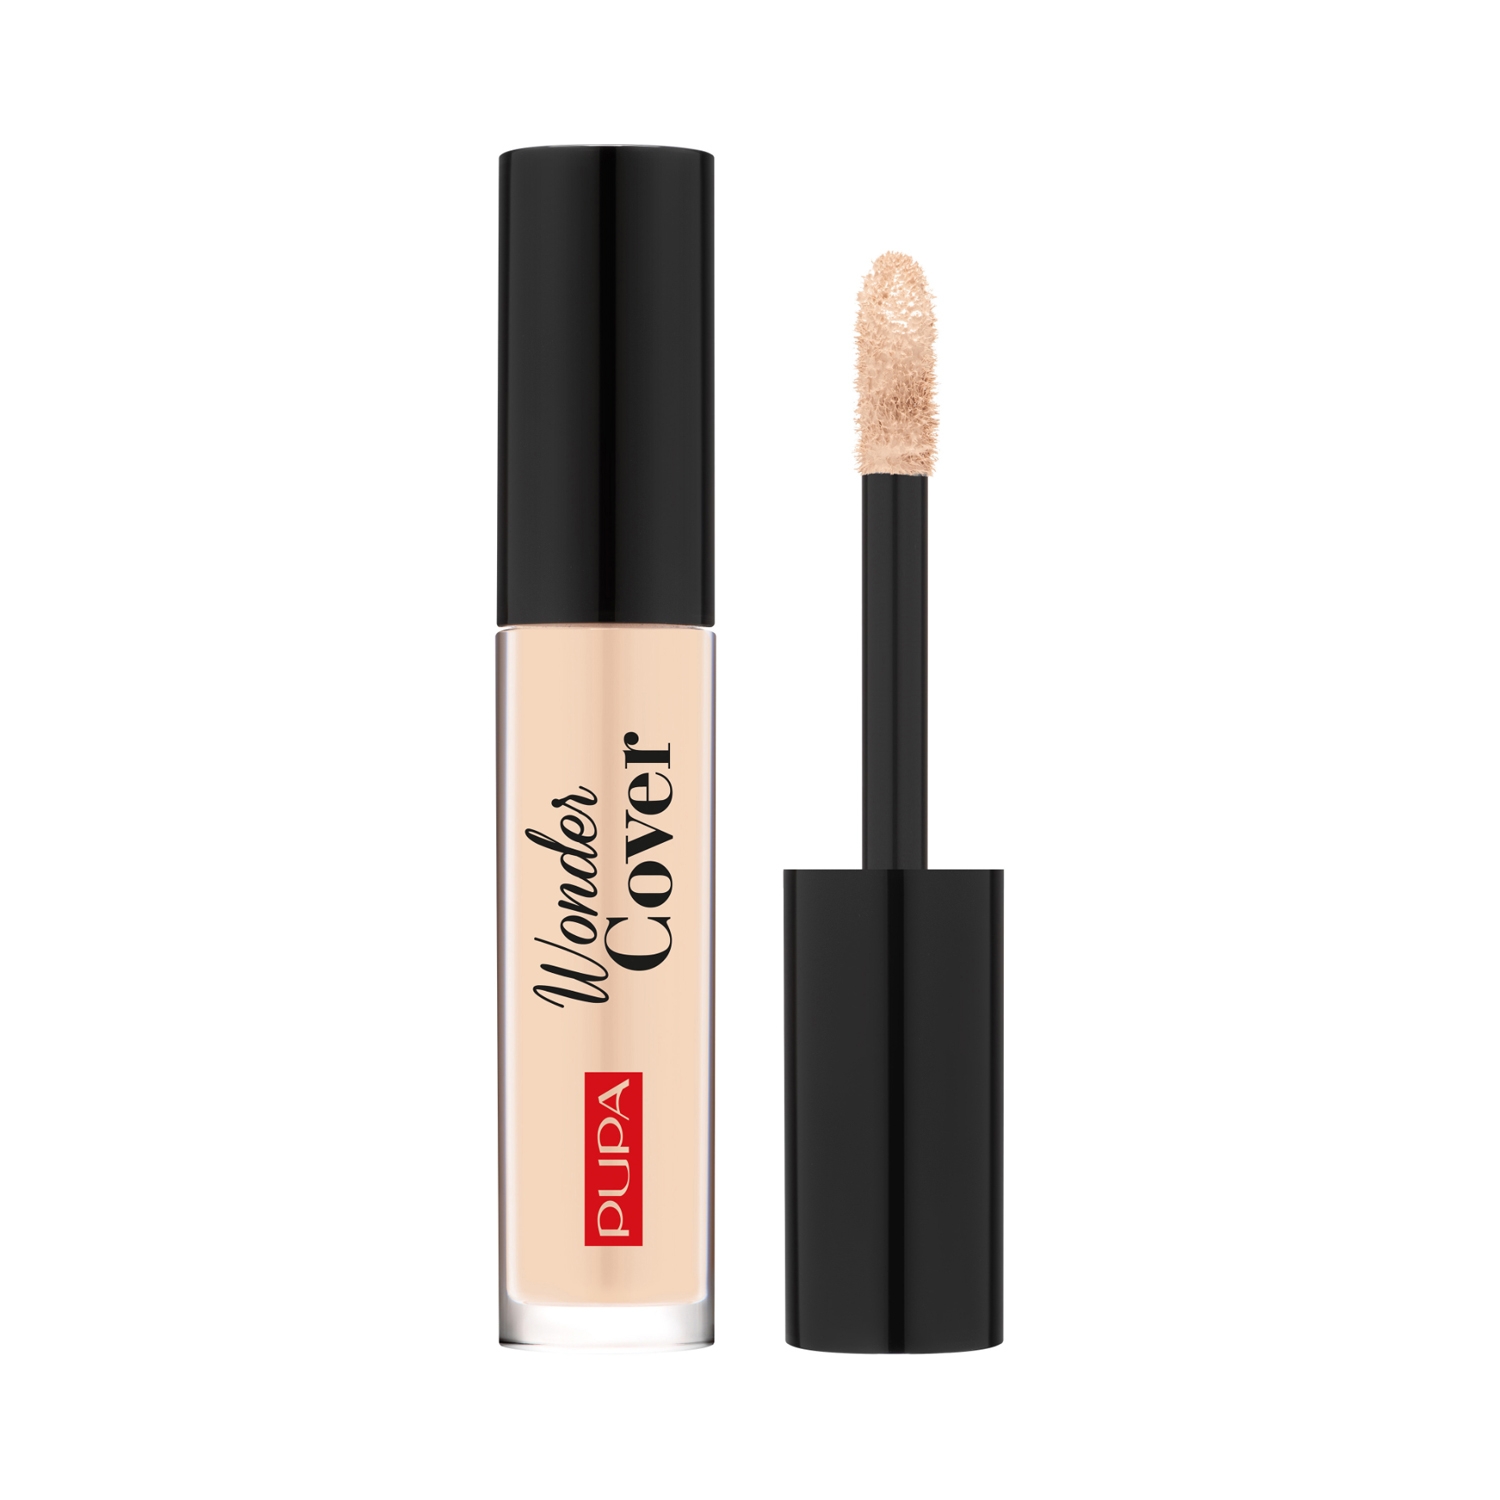 Pupa Milano Wonder Cover Full Coverage Concealer Perfecting Effect - 002 Light Beige (4.2ml)